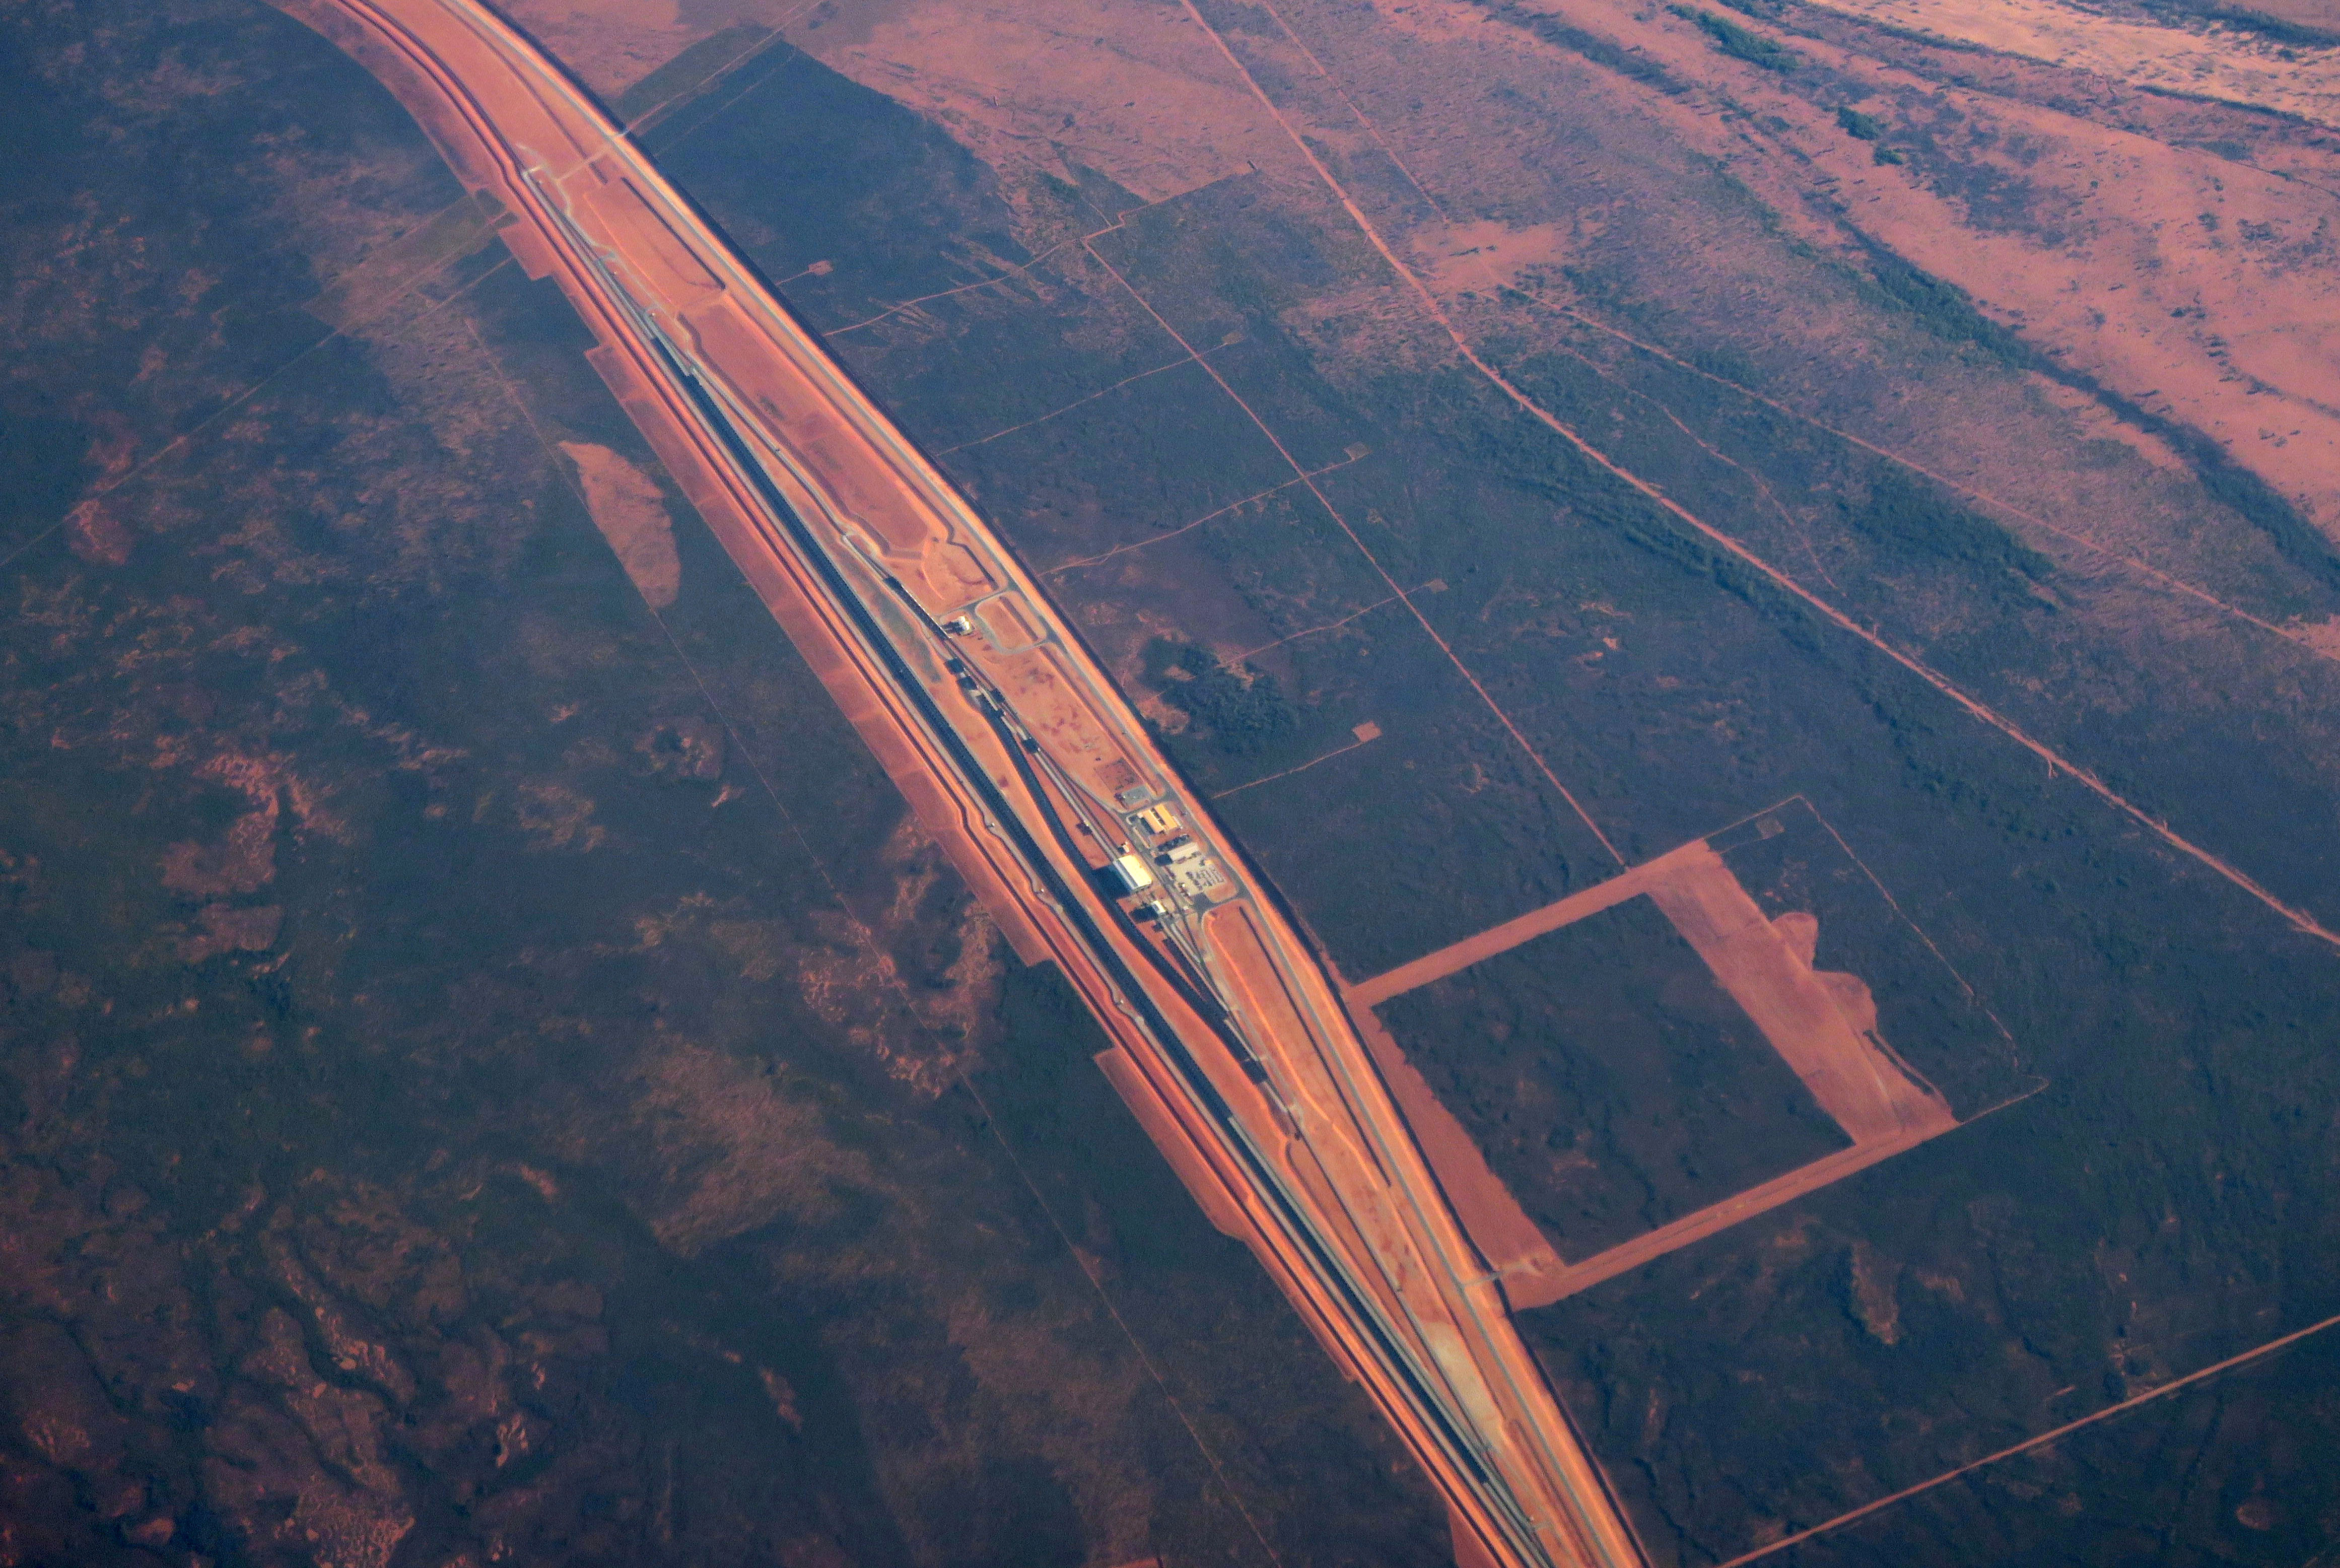 Iron ore mining operations, including a rail network, can be seen in outback Western Australia near the city of Port Hedland